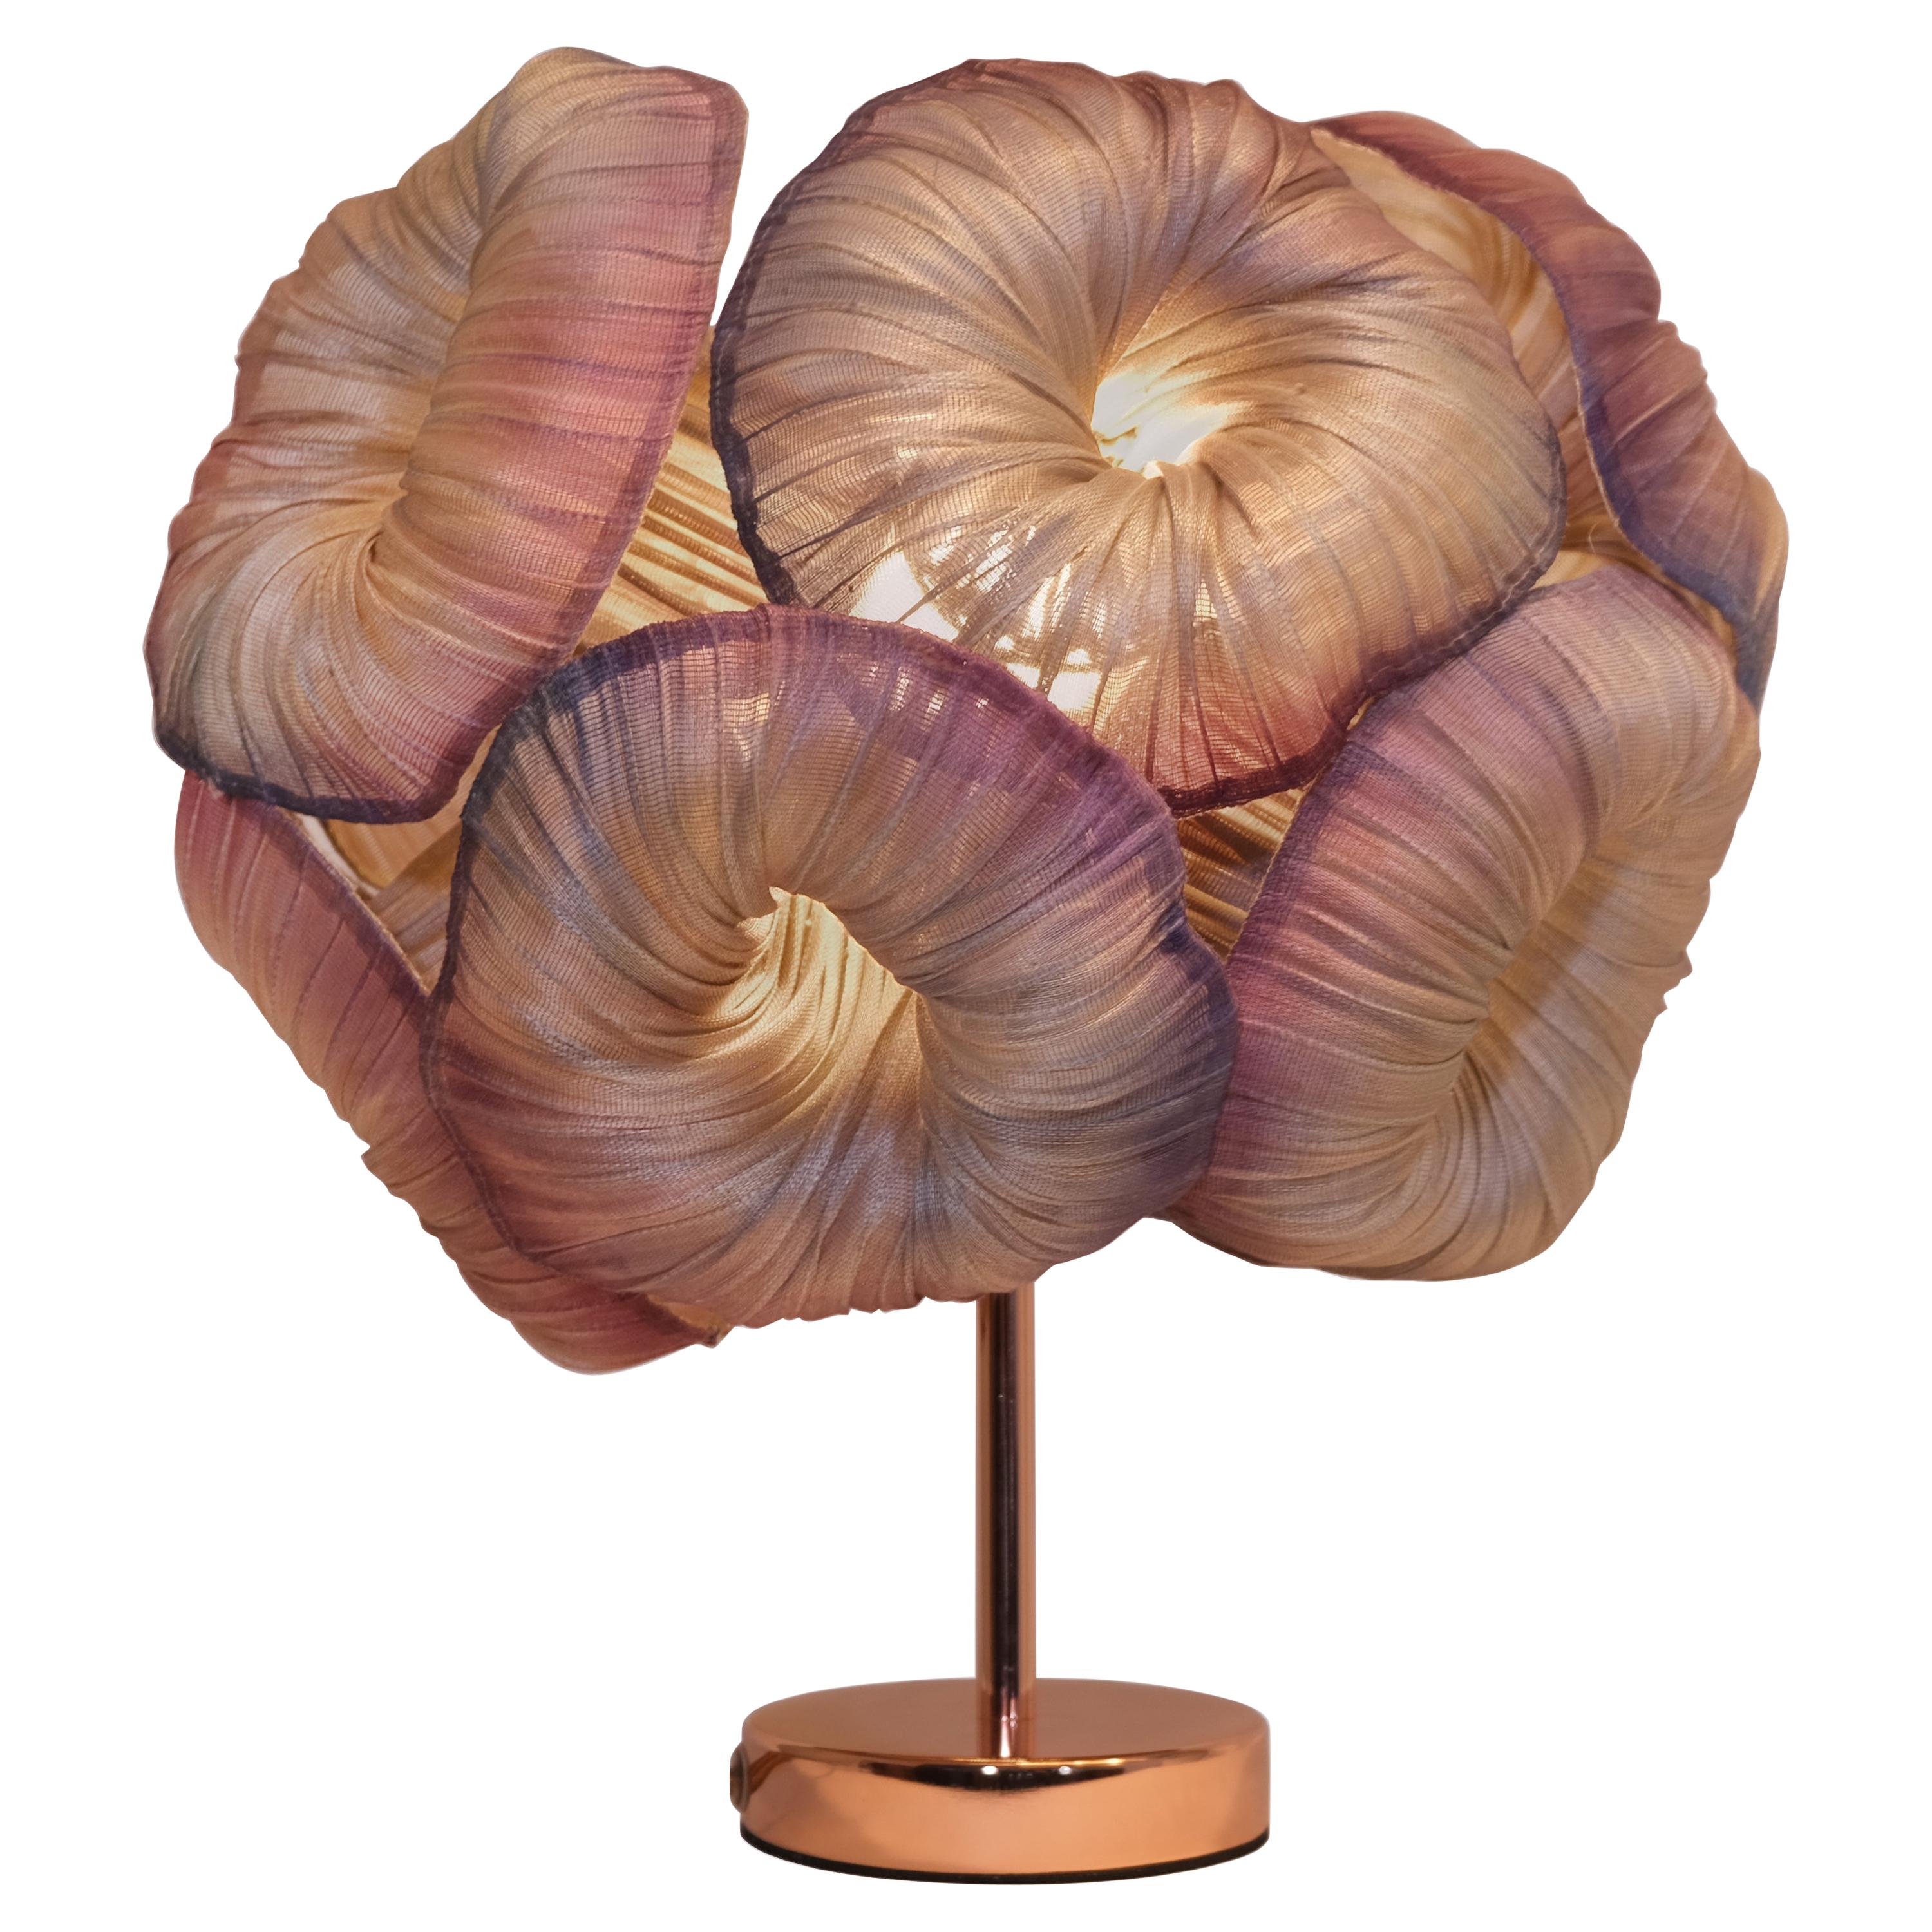 Modern Fabric Table Hand-Painted Lamp Anemone by Studio Mirei